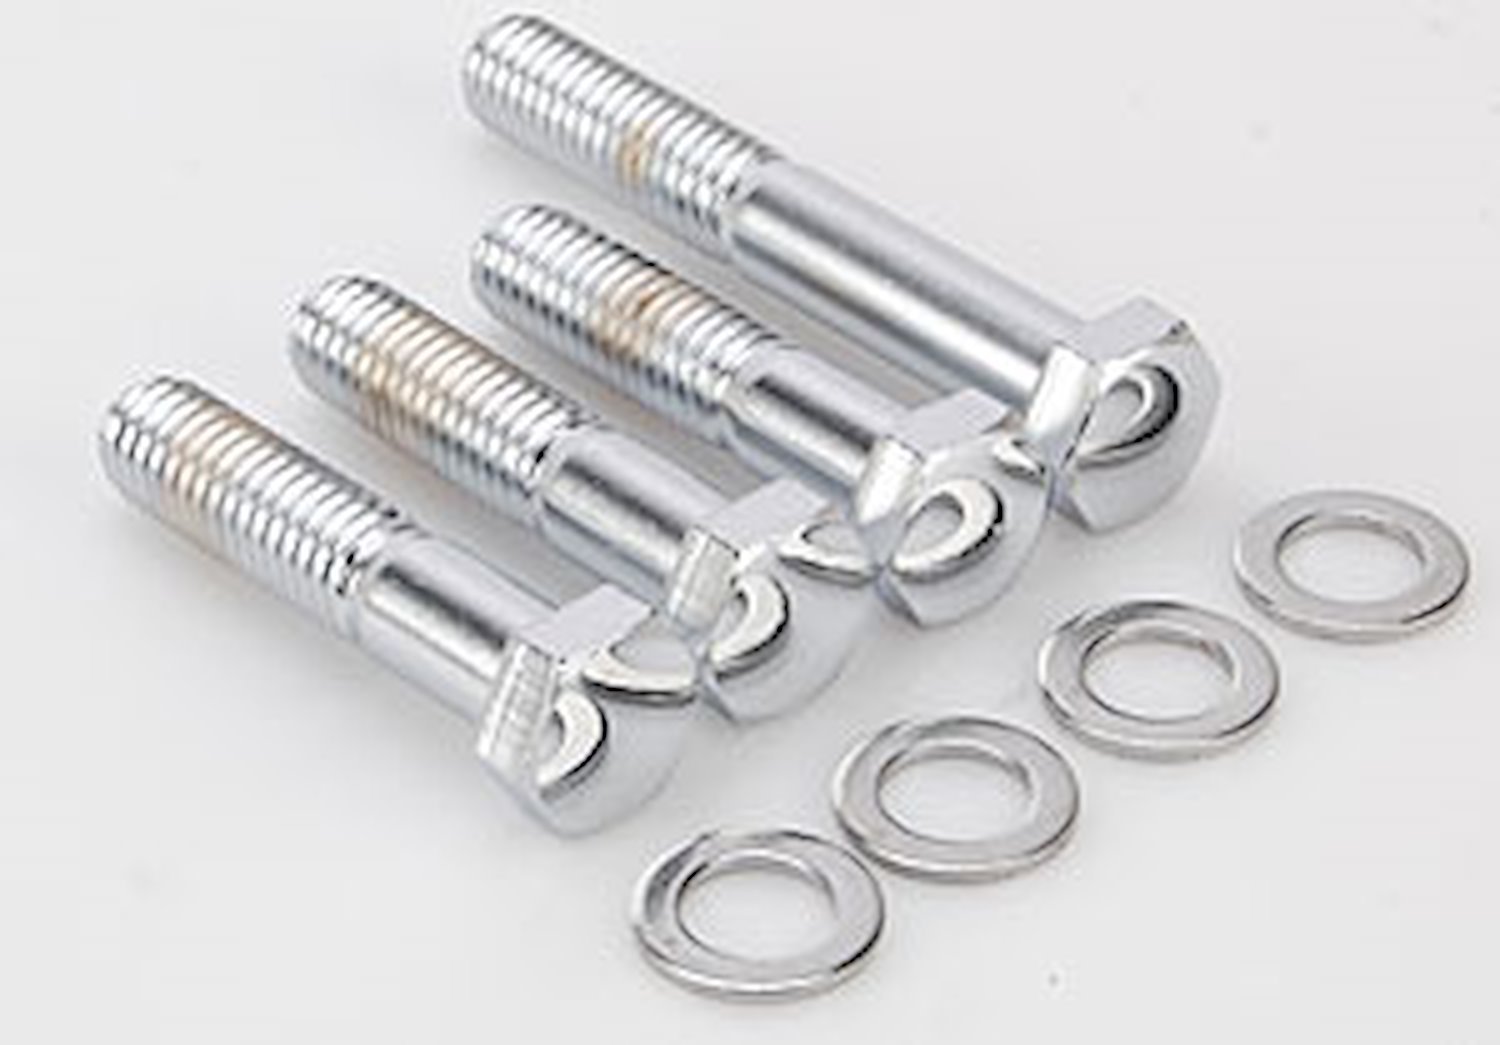 Chrome-Plated Water Pump Bolts Hex Head